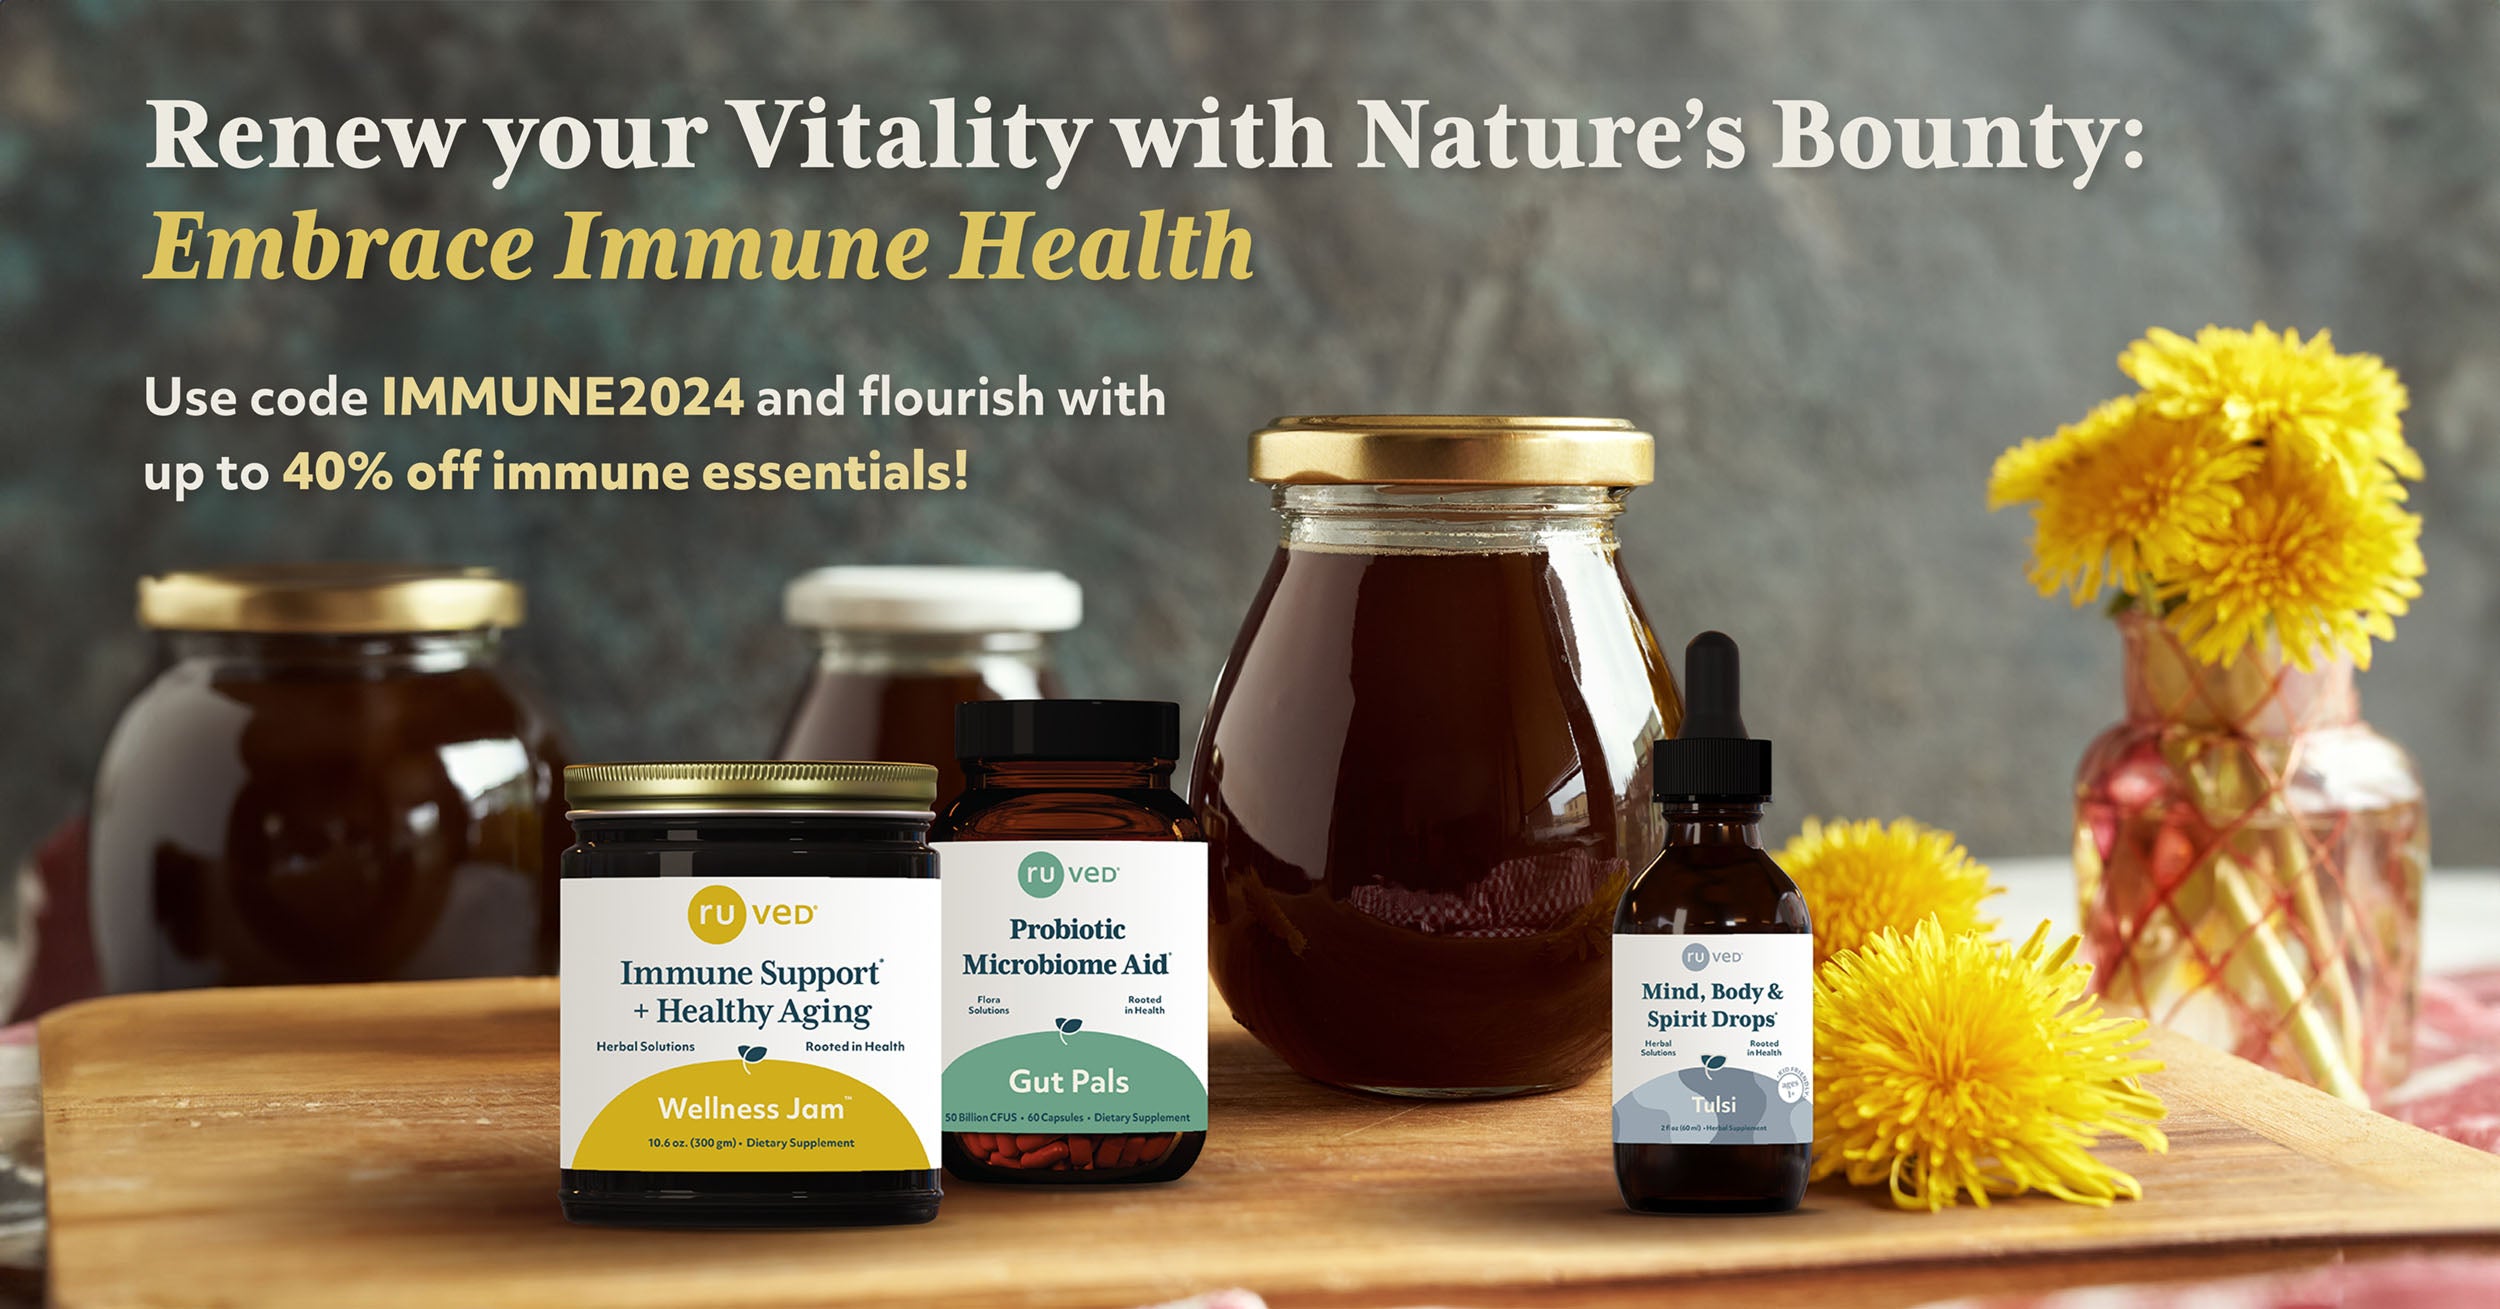 Renew your vitality with nature's bounty and embrace immune health! Use code IMMUNE2024 and flourish with up to 40% off immune essentials. 